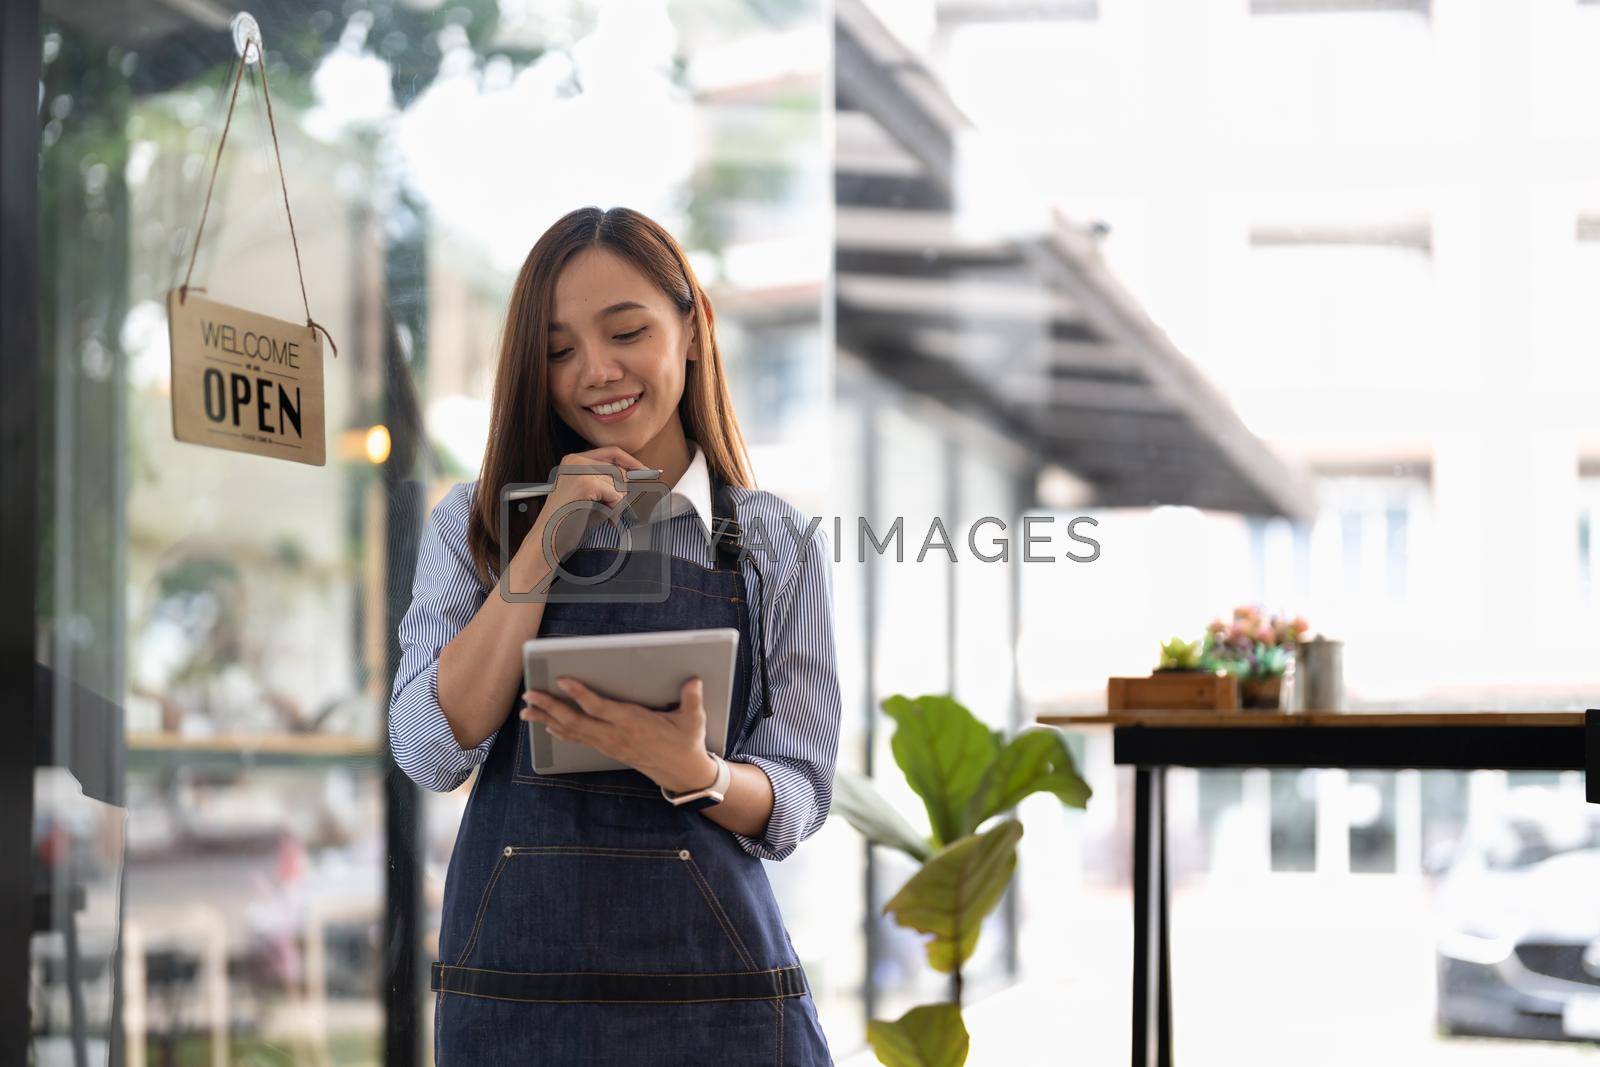 Royalty free image of Young asian woman coffee shop owner wearing apron holding digital tablet ready to receive orders. by nateemee